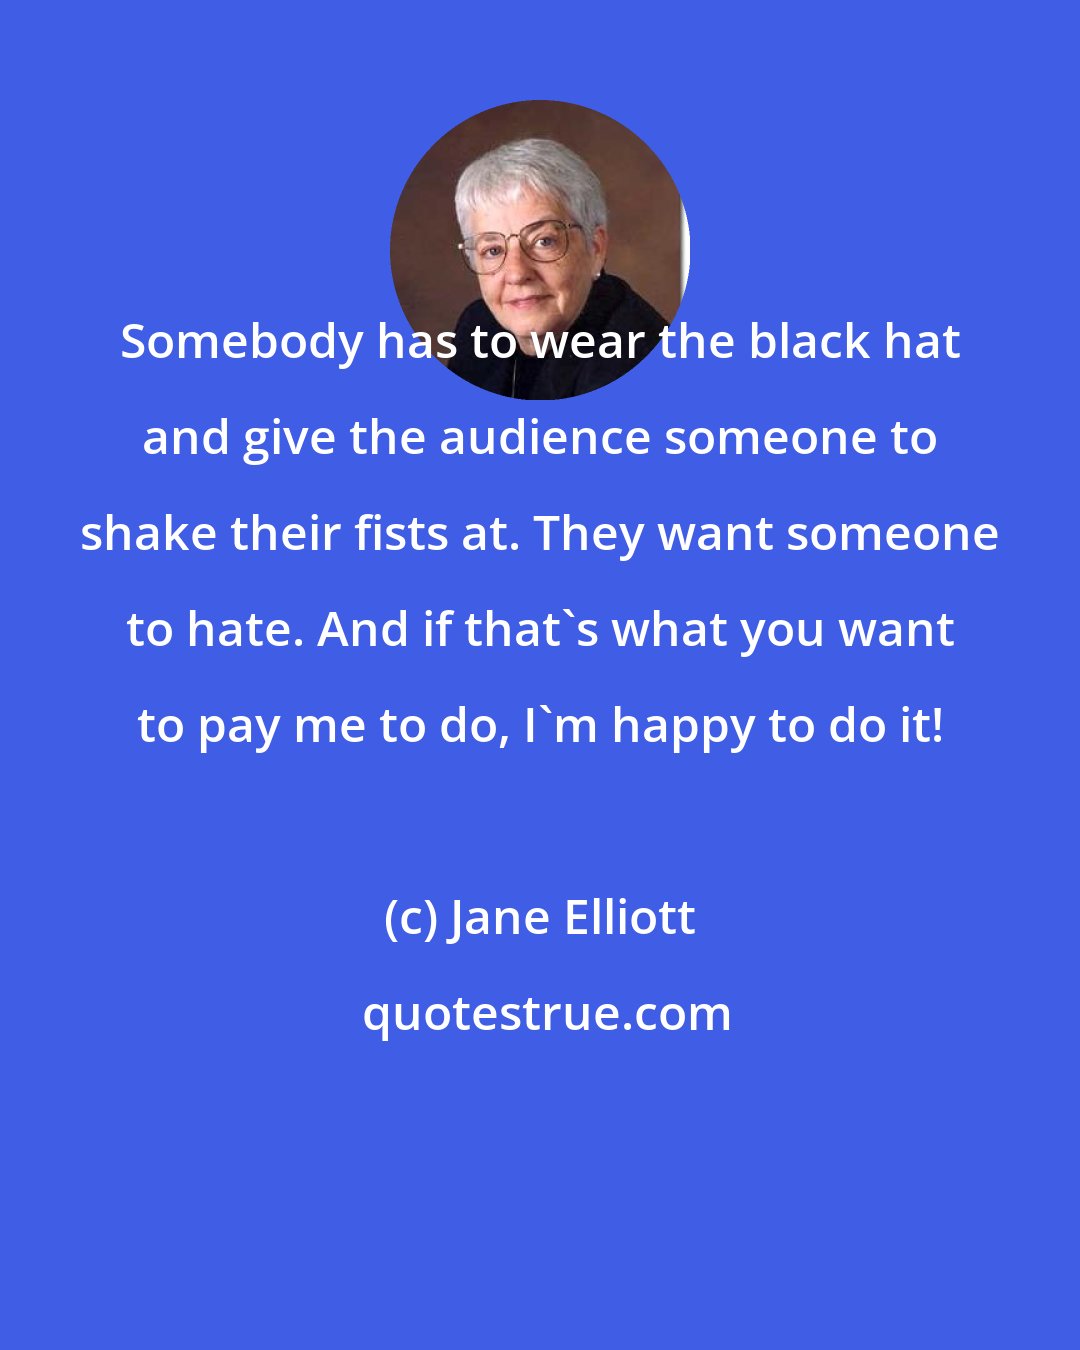 Jane Elliott: Somebody has to wear the black hat and give the audience someone to shake their fists at. They want someone to hate. And if that's what you want to pay me to do, I'm happy to do it!